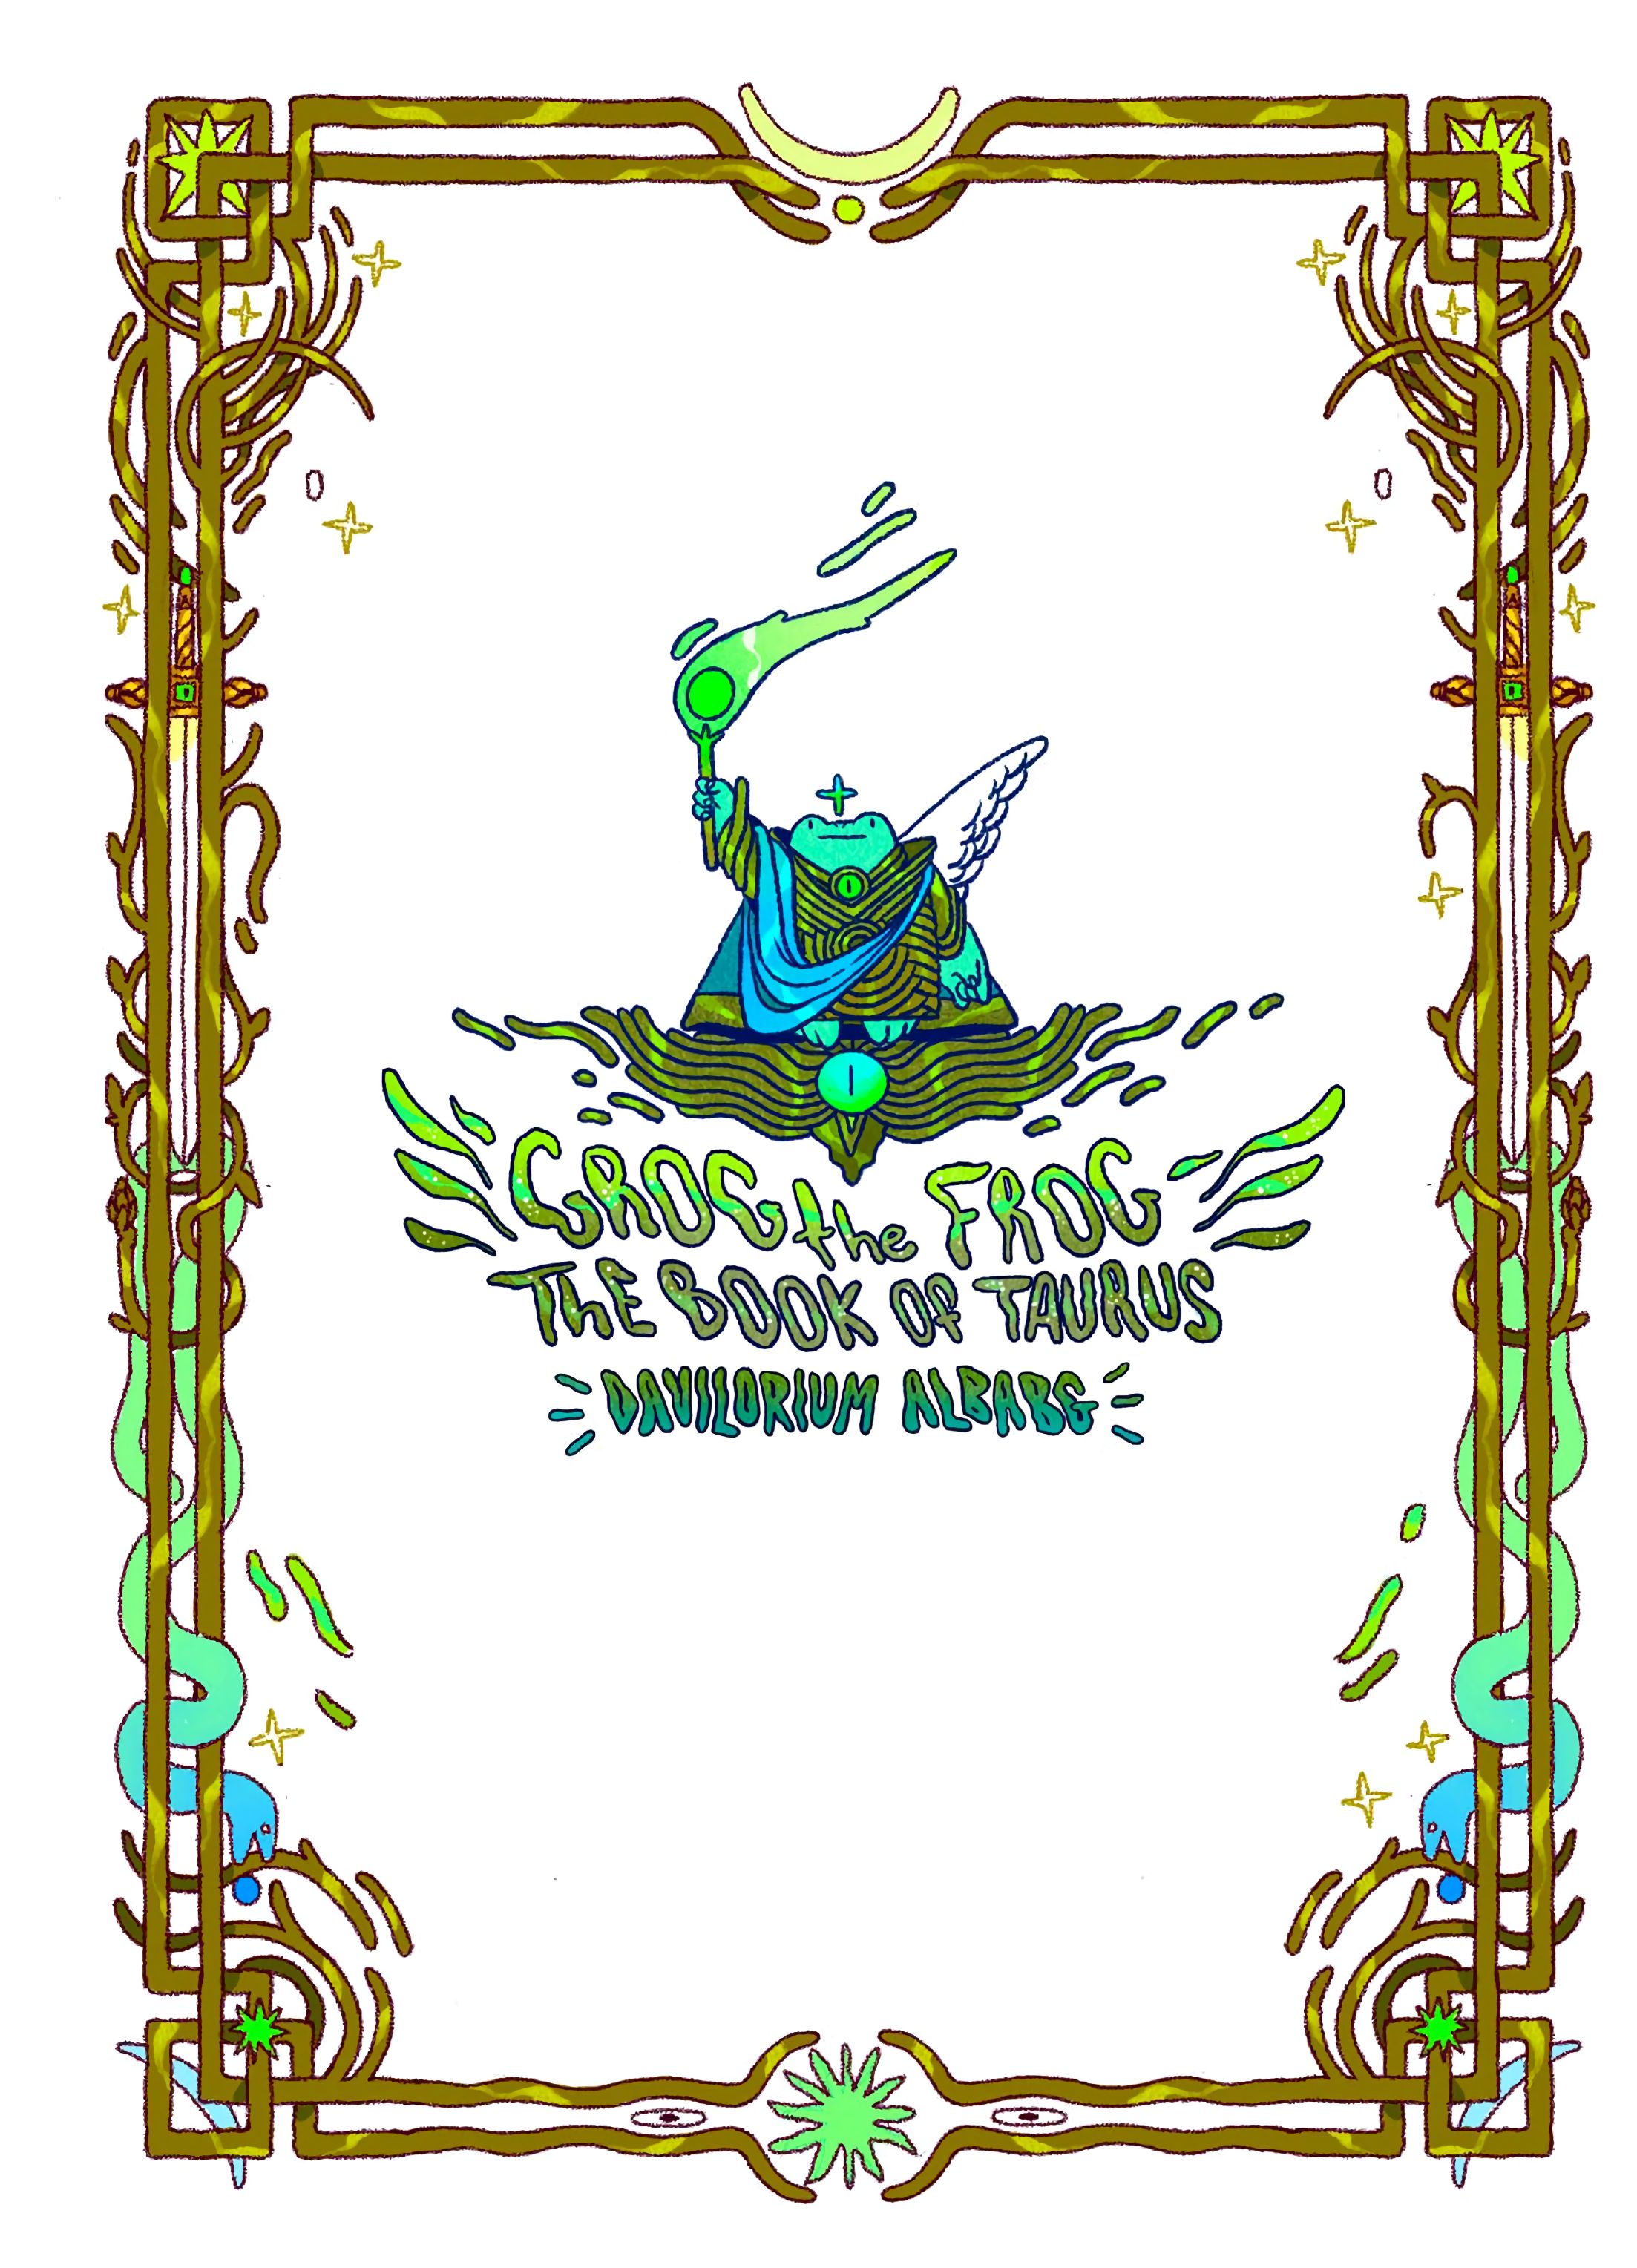 Read online Grog the Frog: The Book of Taurus comic -  Issue # TPB - 3